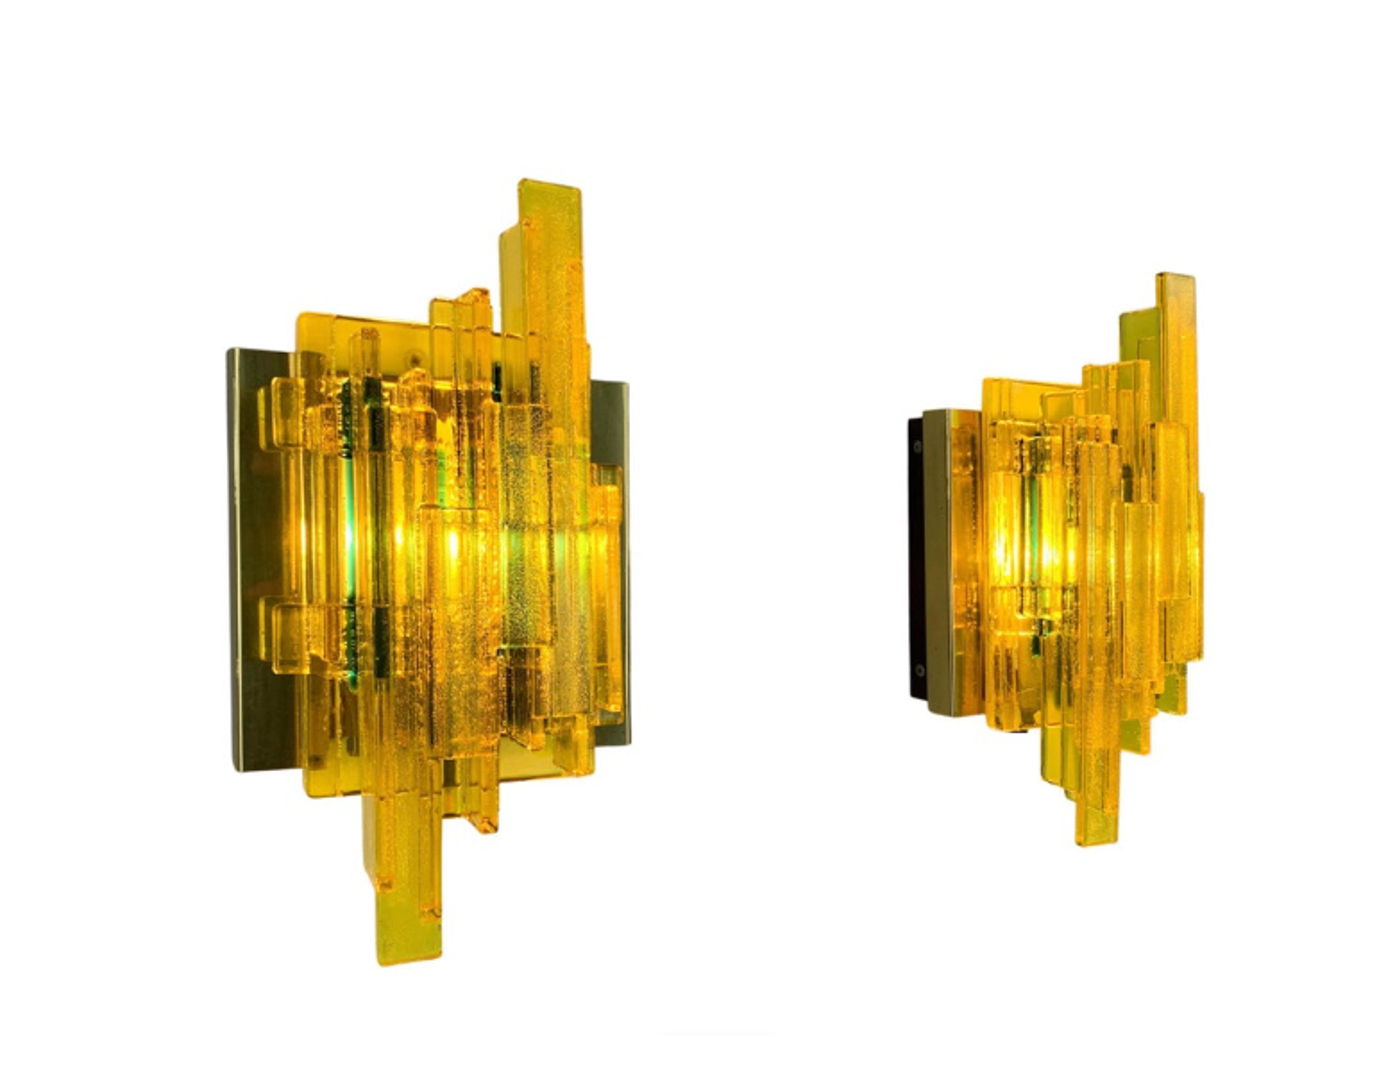 Pair of Brutalist Danish Wall Lamps by Claus Bolby for Cebo Industri, 1970s